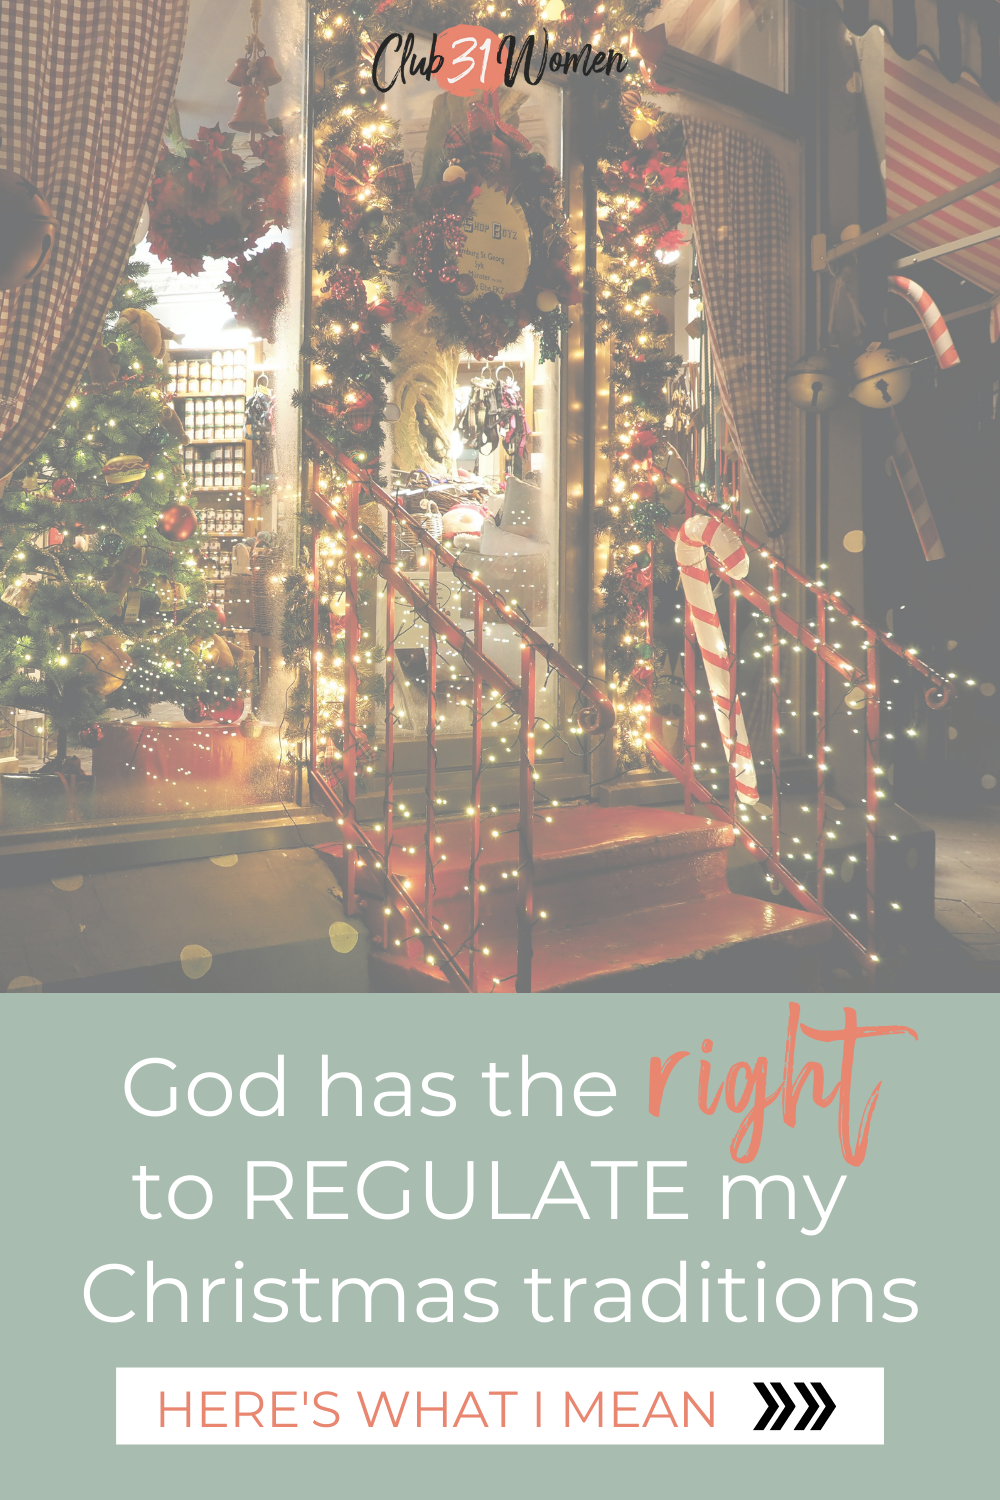 Bringing back a Christ-focused Christmas can be so refreshing and so simple and it really helps us focus our eyes on the season's priority. via @Club31Women